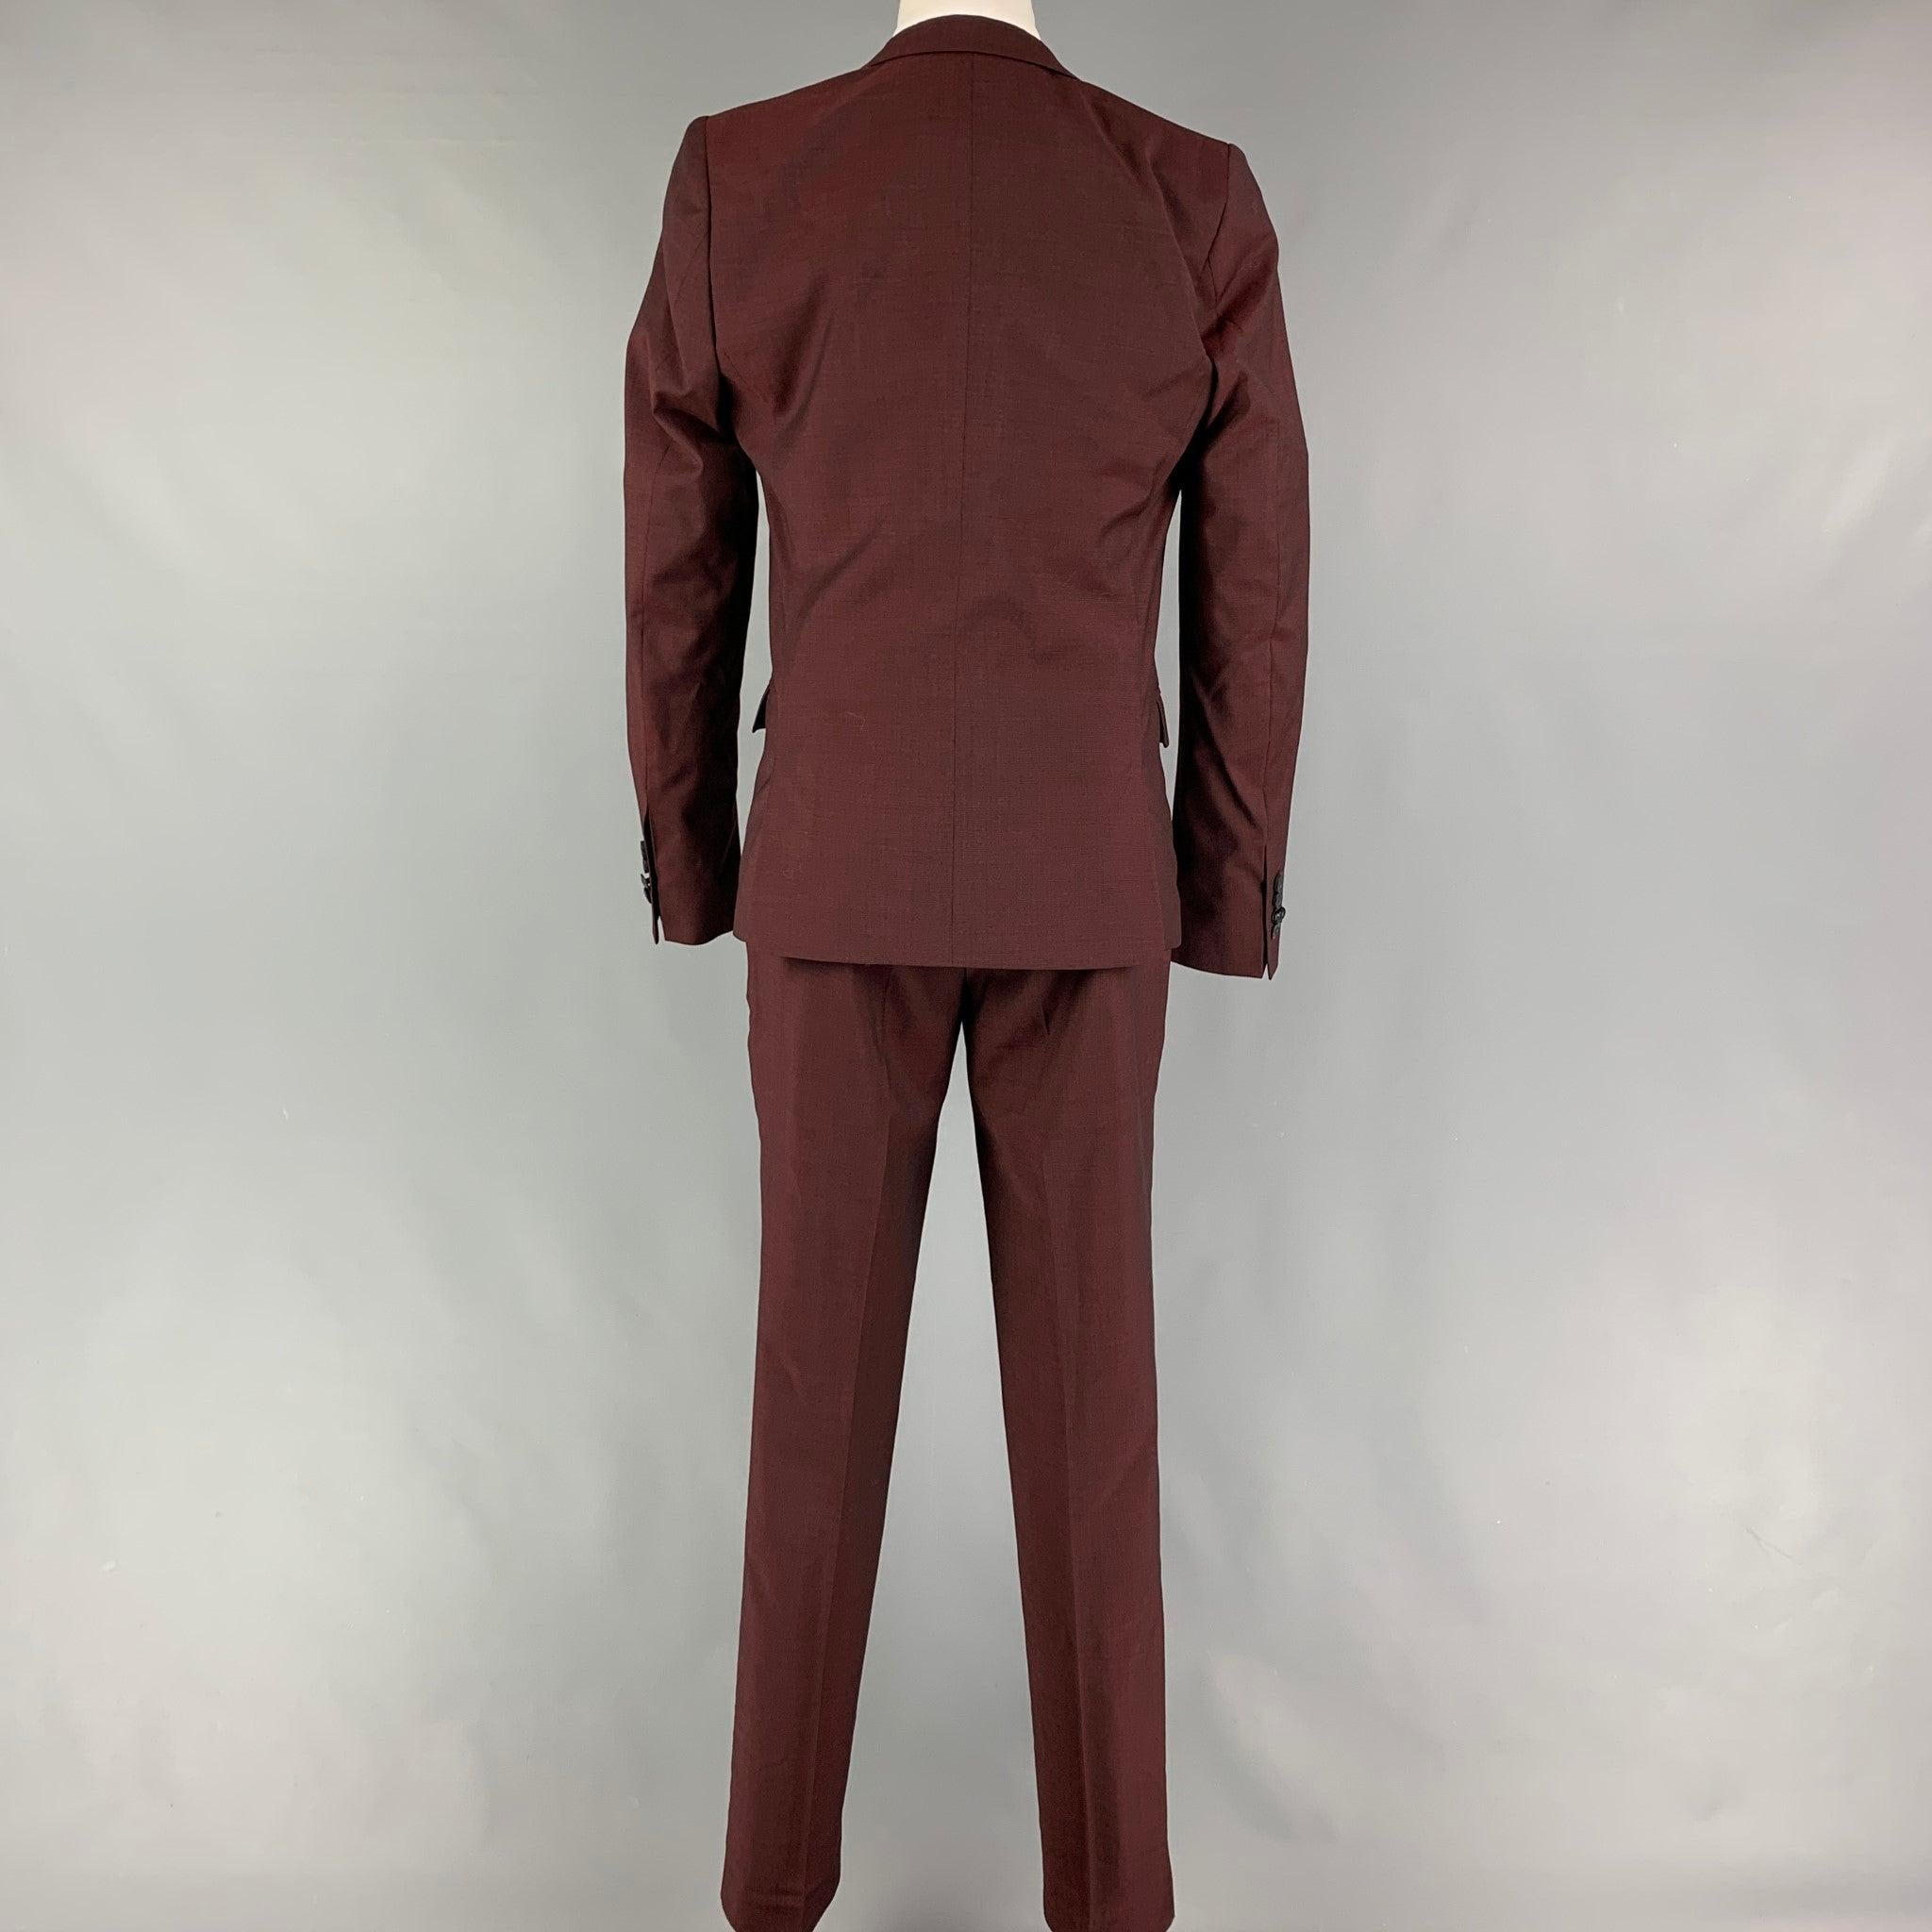 THE KOOPLES Size 34 Burgundy Wool Blend Notch Lapel 3 Piece Suit In Excellent Condition For Sale In San Francisco, CA